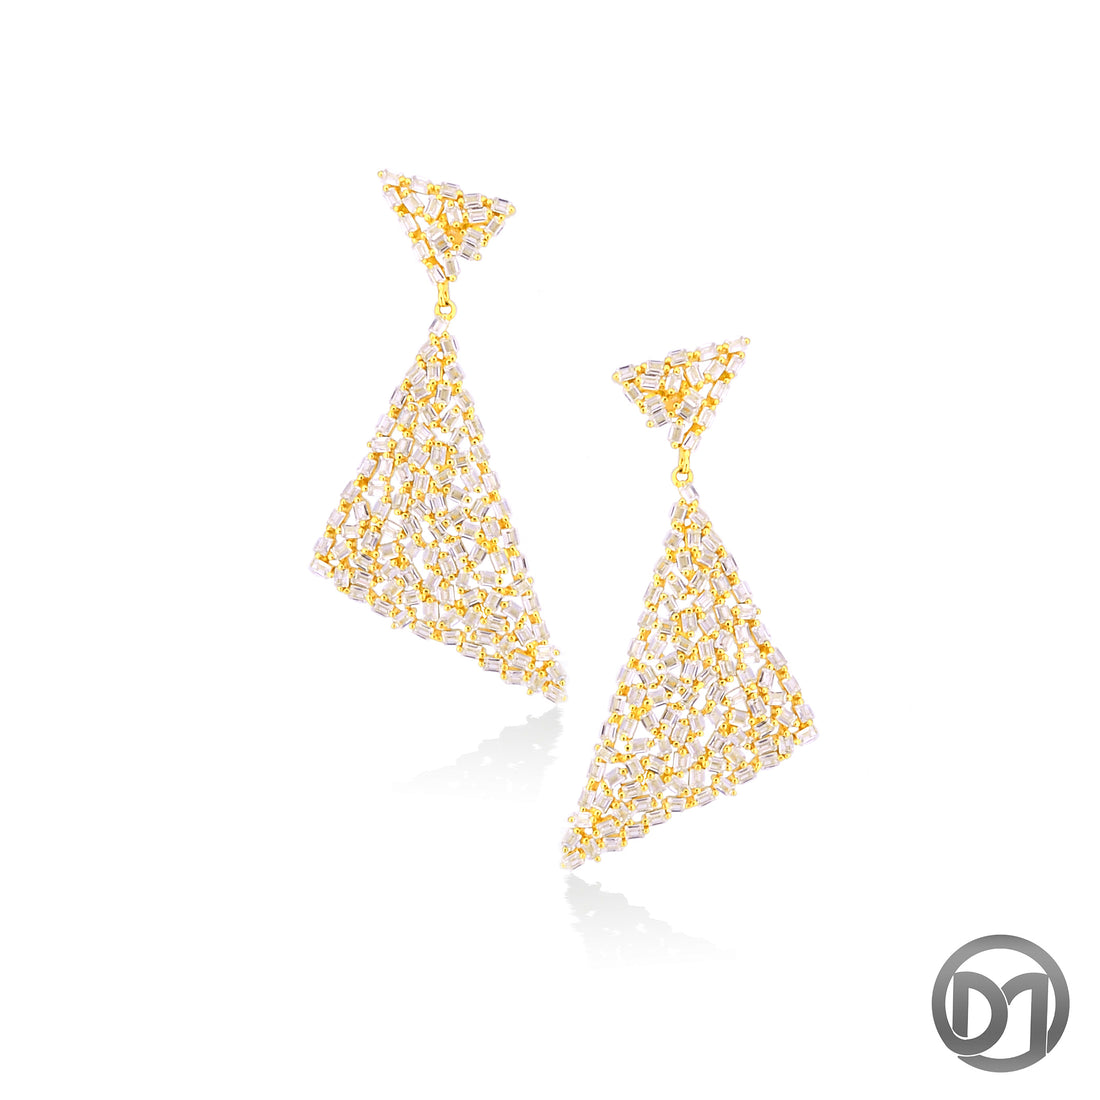 Elevate your evening style with these gleaming triangle earrings in sterling silver